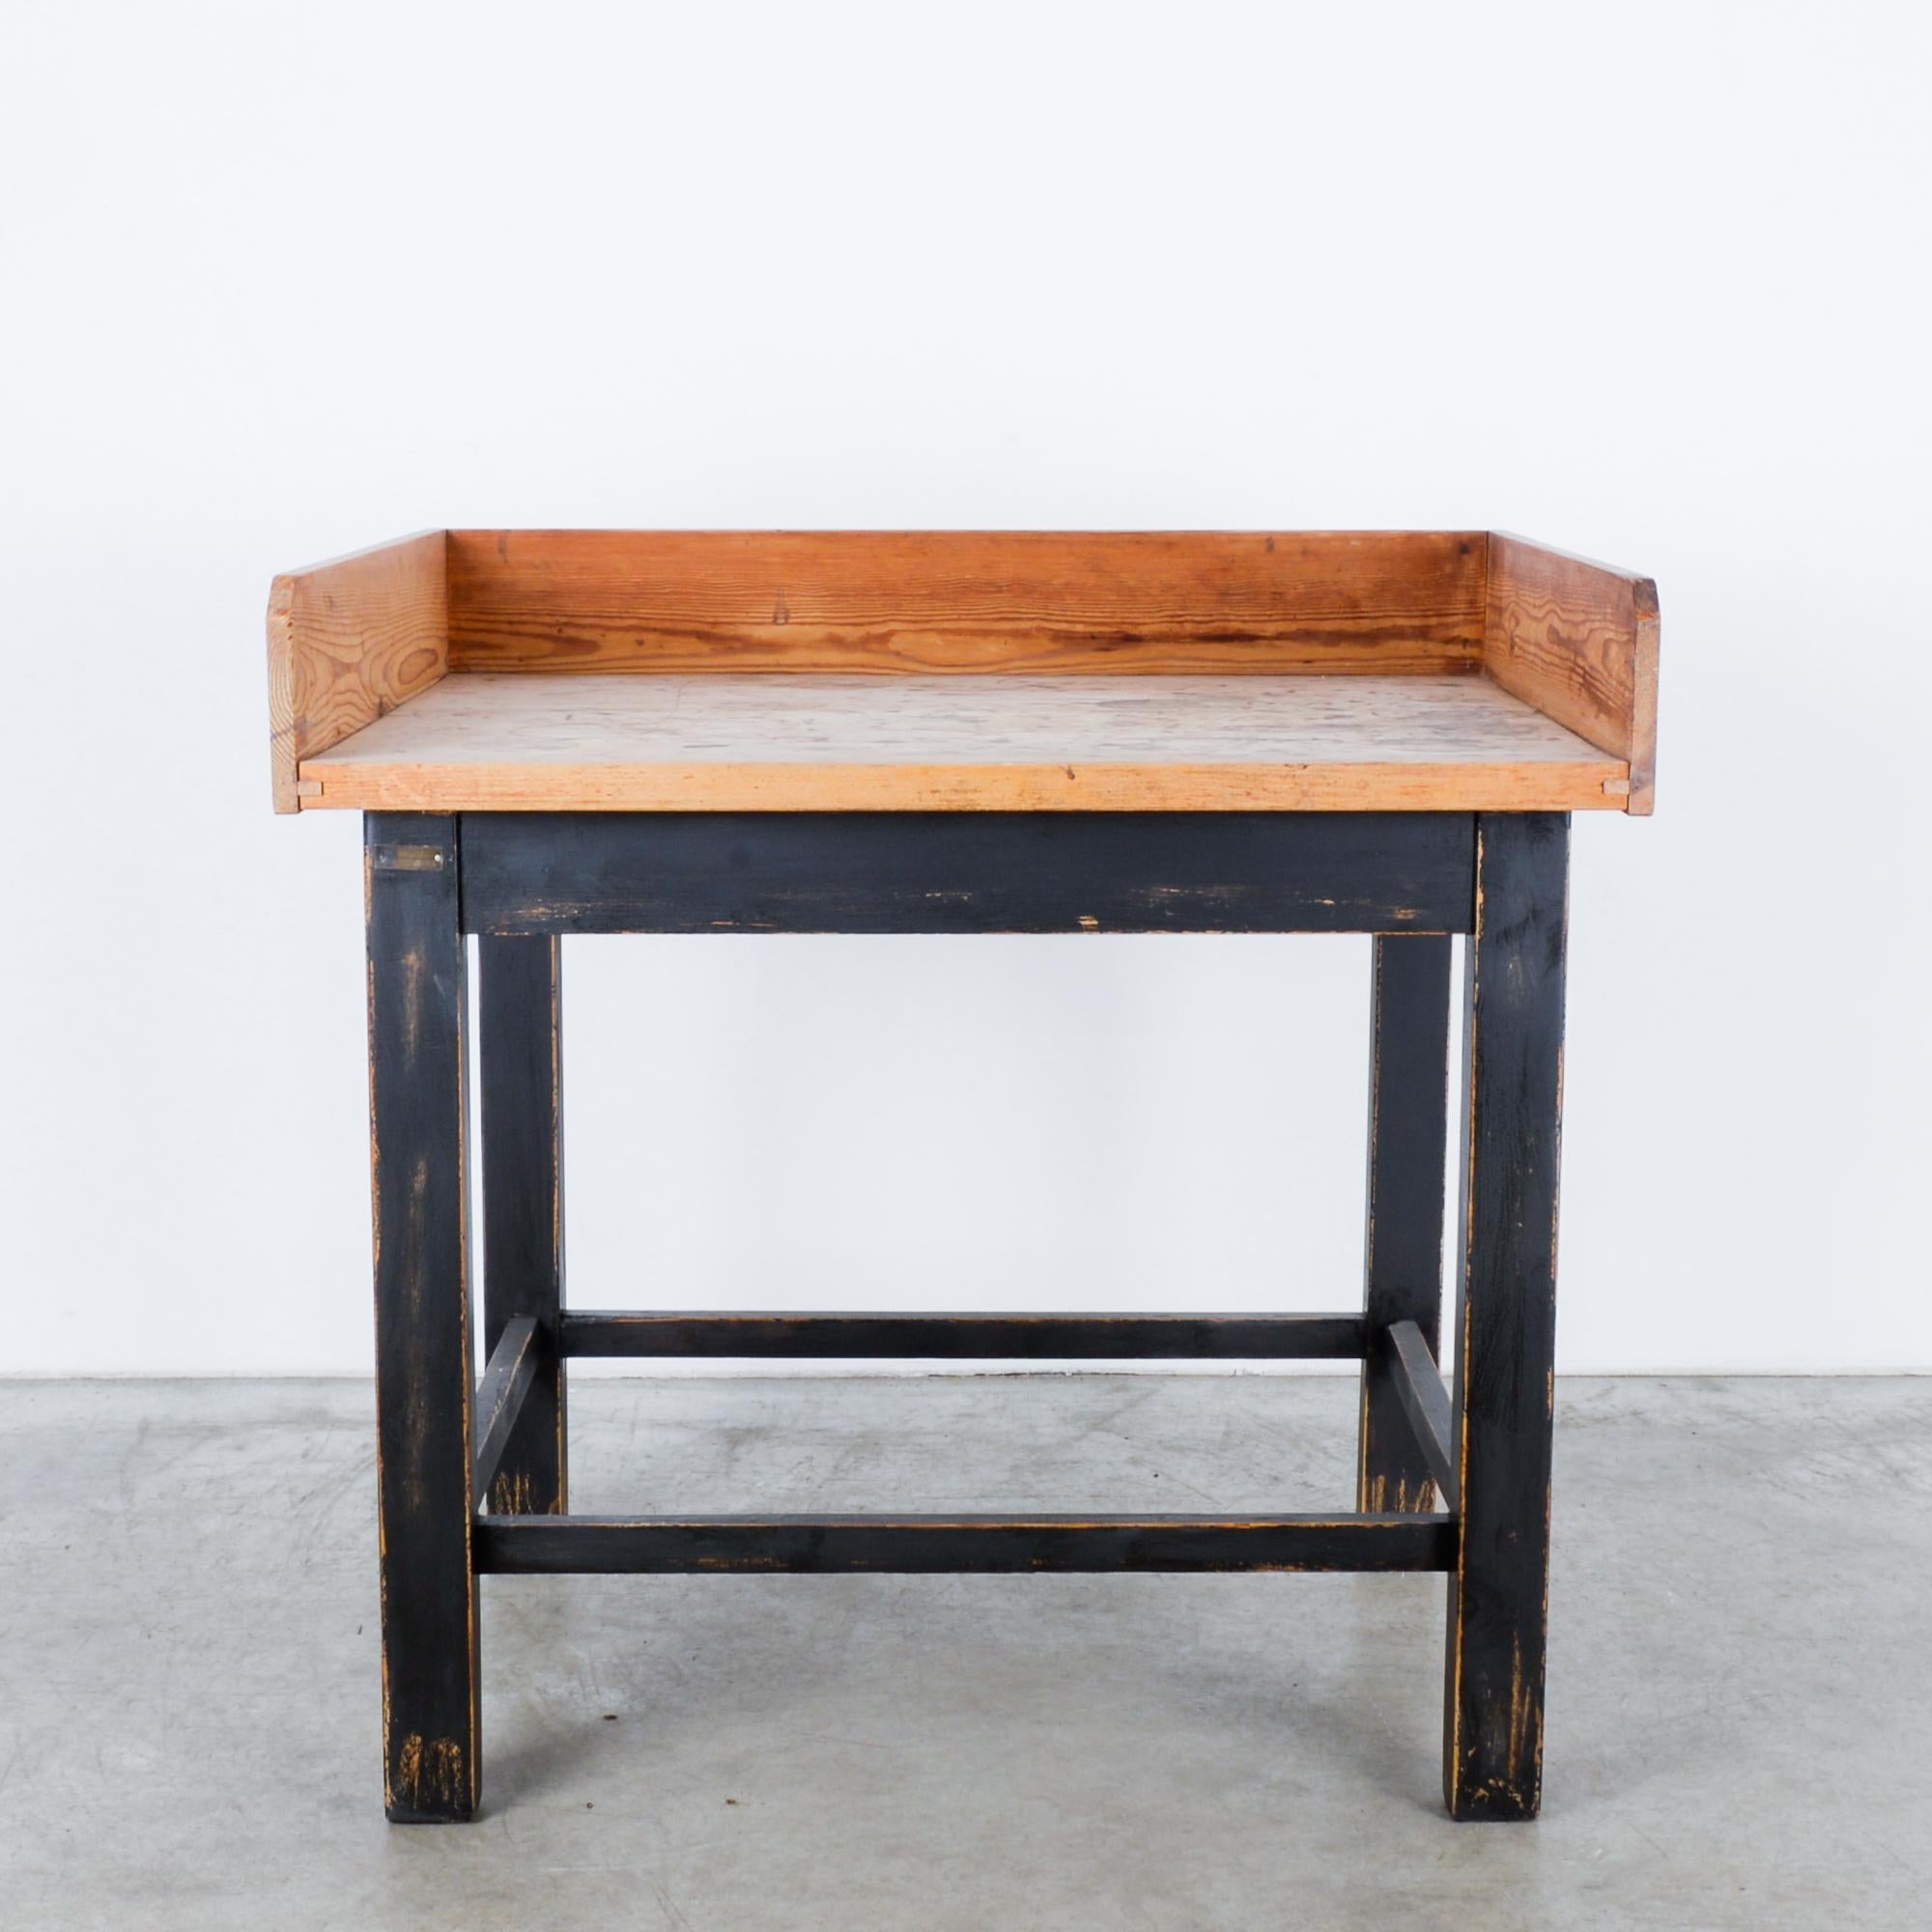 A wooden bakery table from Central Europe, circa 1950. A square, black painted frame supports a worktop of natural wood. Wooden panels on three sides of the tabletop create an enclosed workspace, a practical touch originally intended to prevent